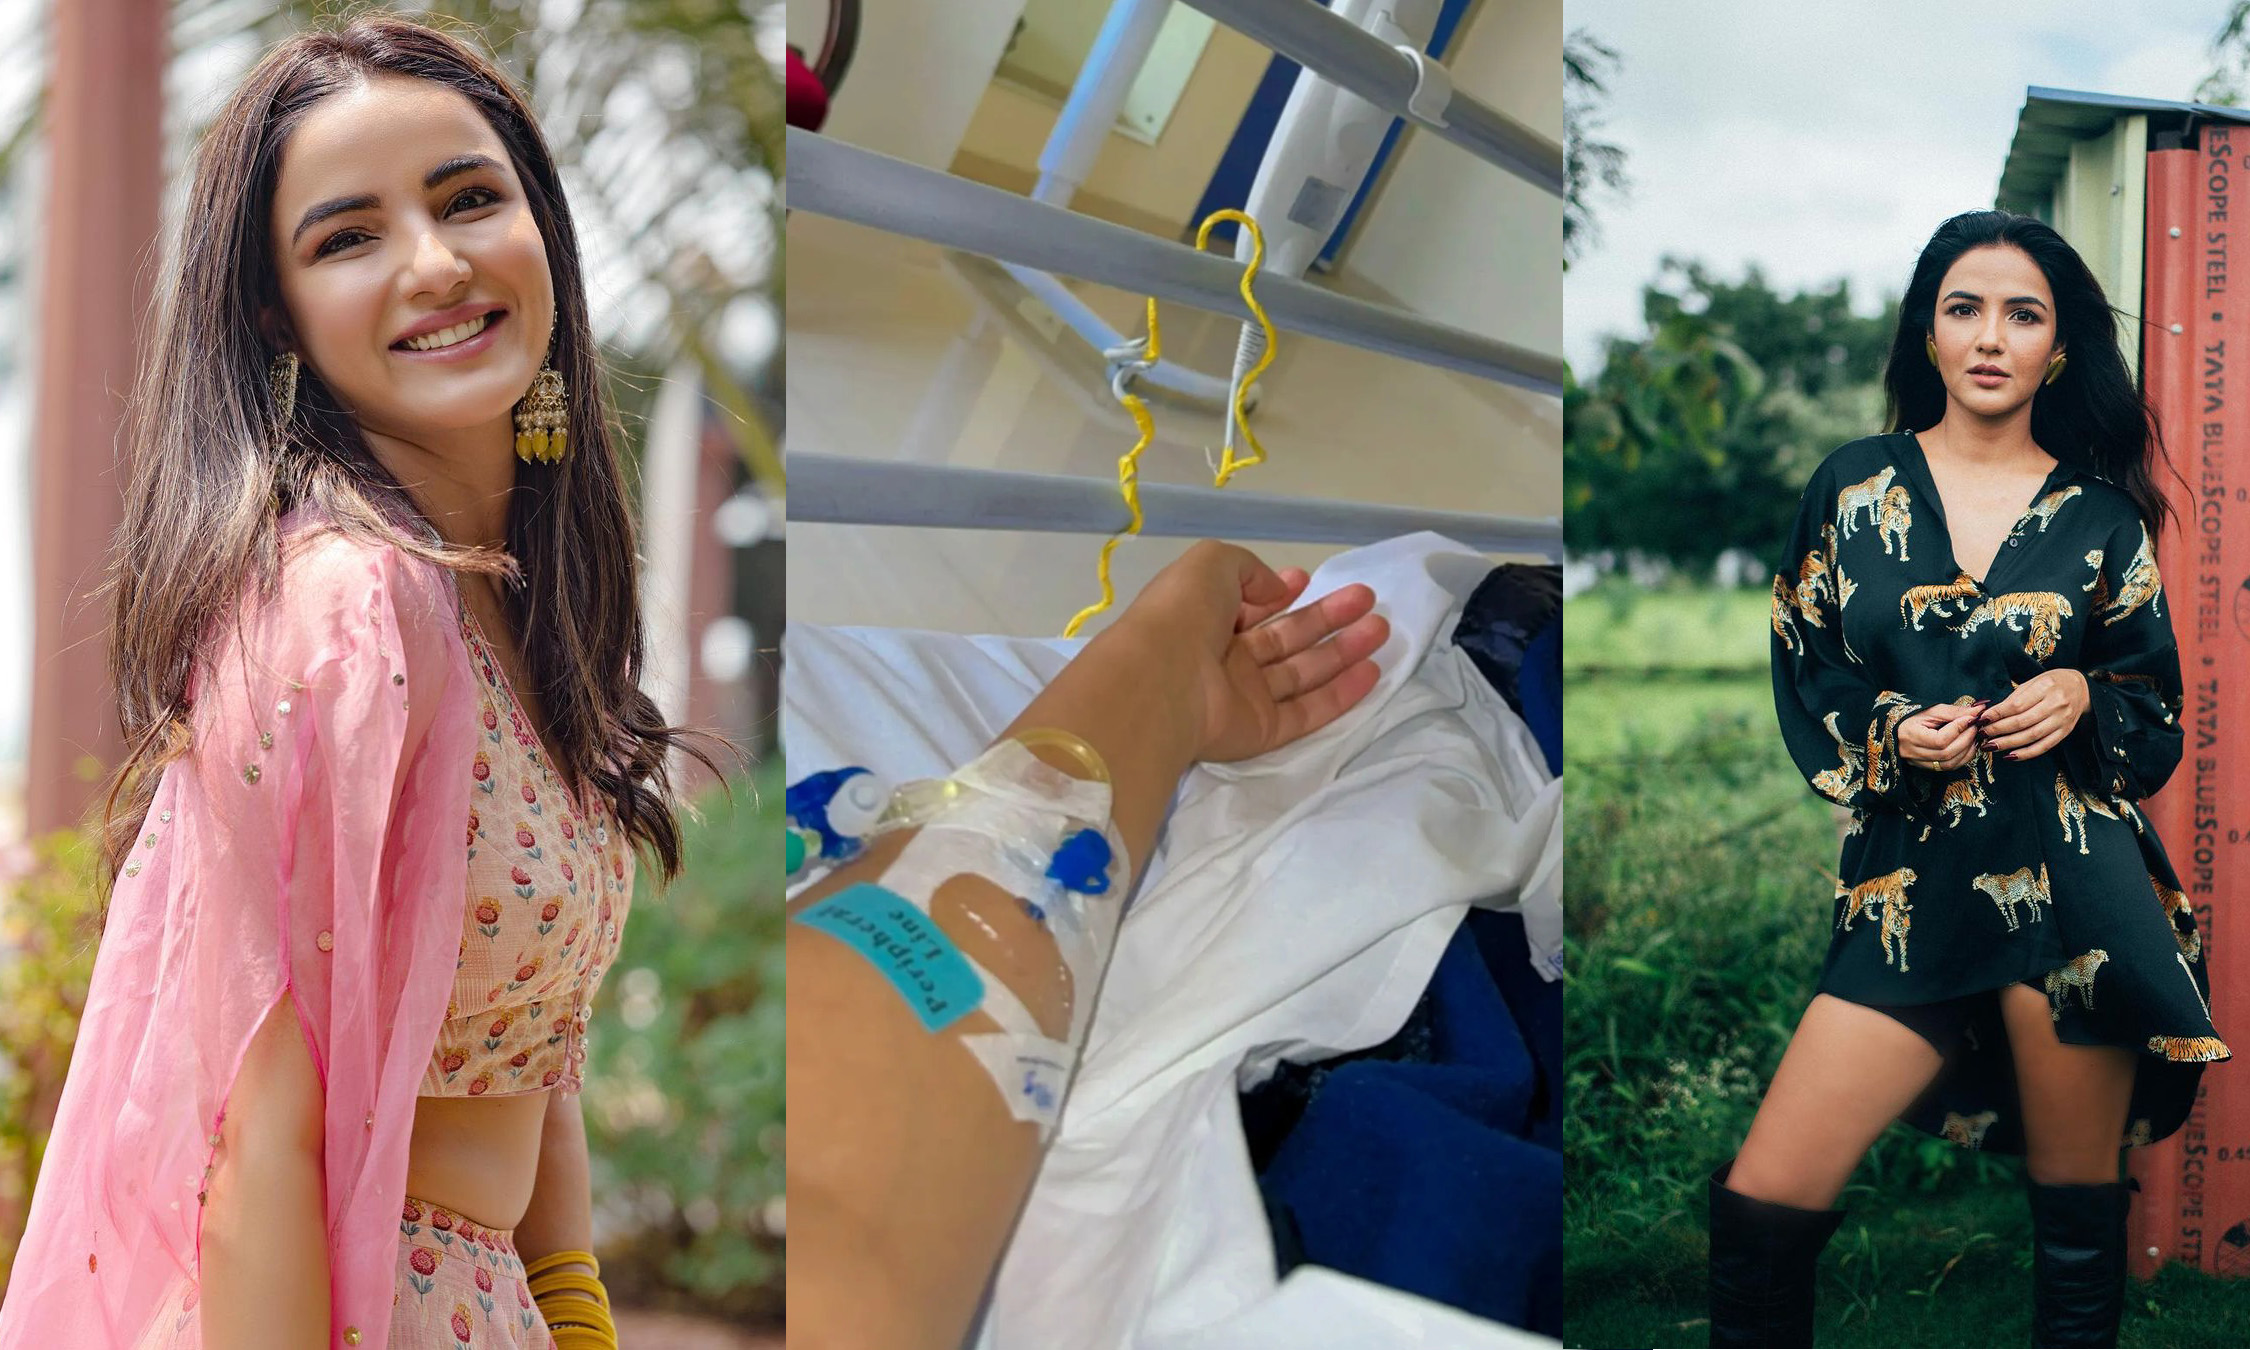 Bigg Boss 14 Fame Jasmin Bhasin Hospitalized Due To Stomach Infection Who Shares Pictures. Jasmin’s Photos Shocked Fans And Followers